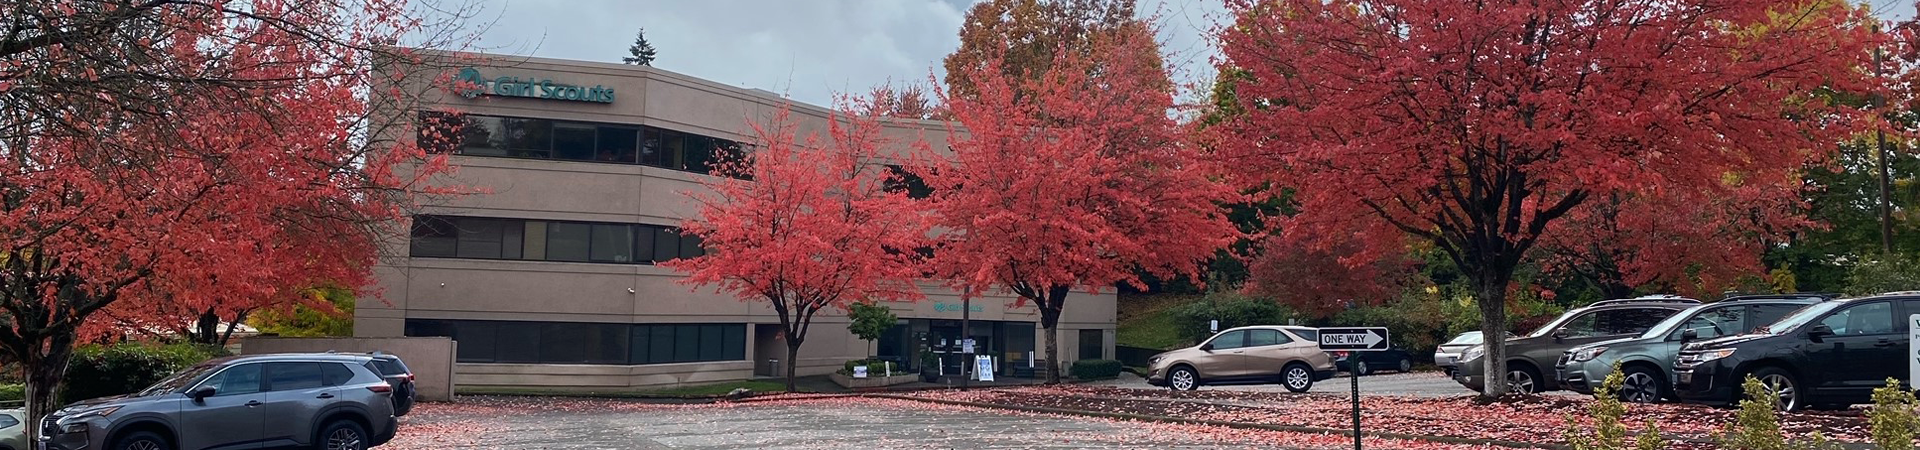  Portland Service Center pictured in fall 